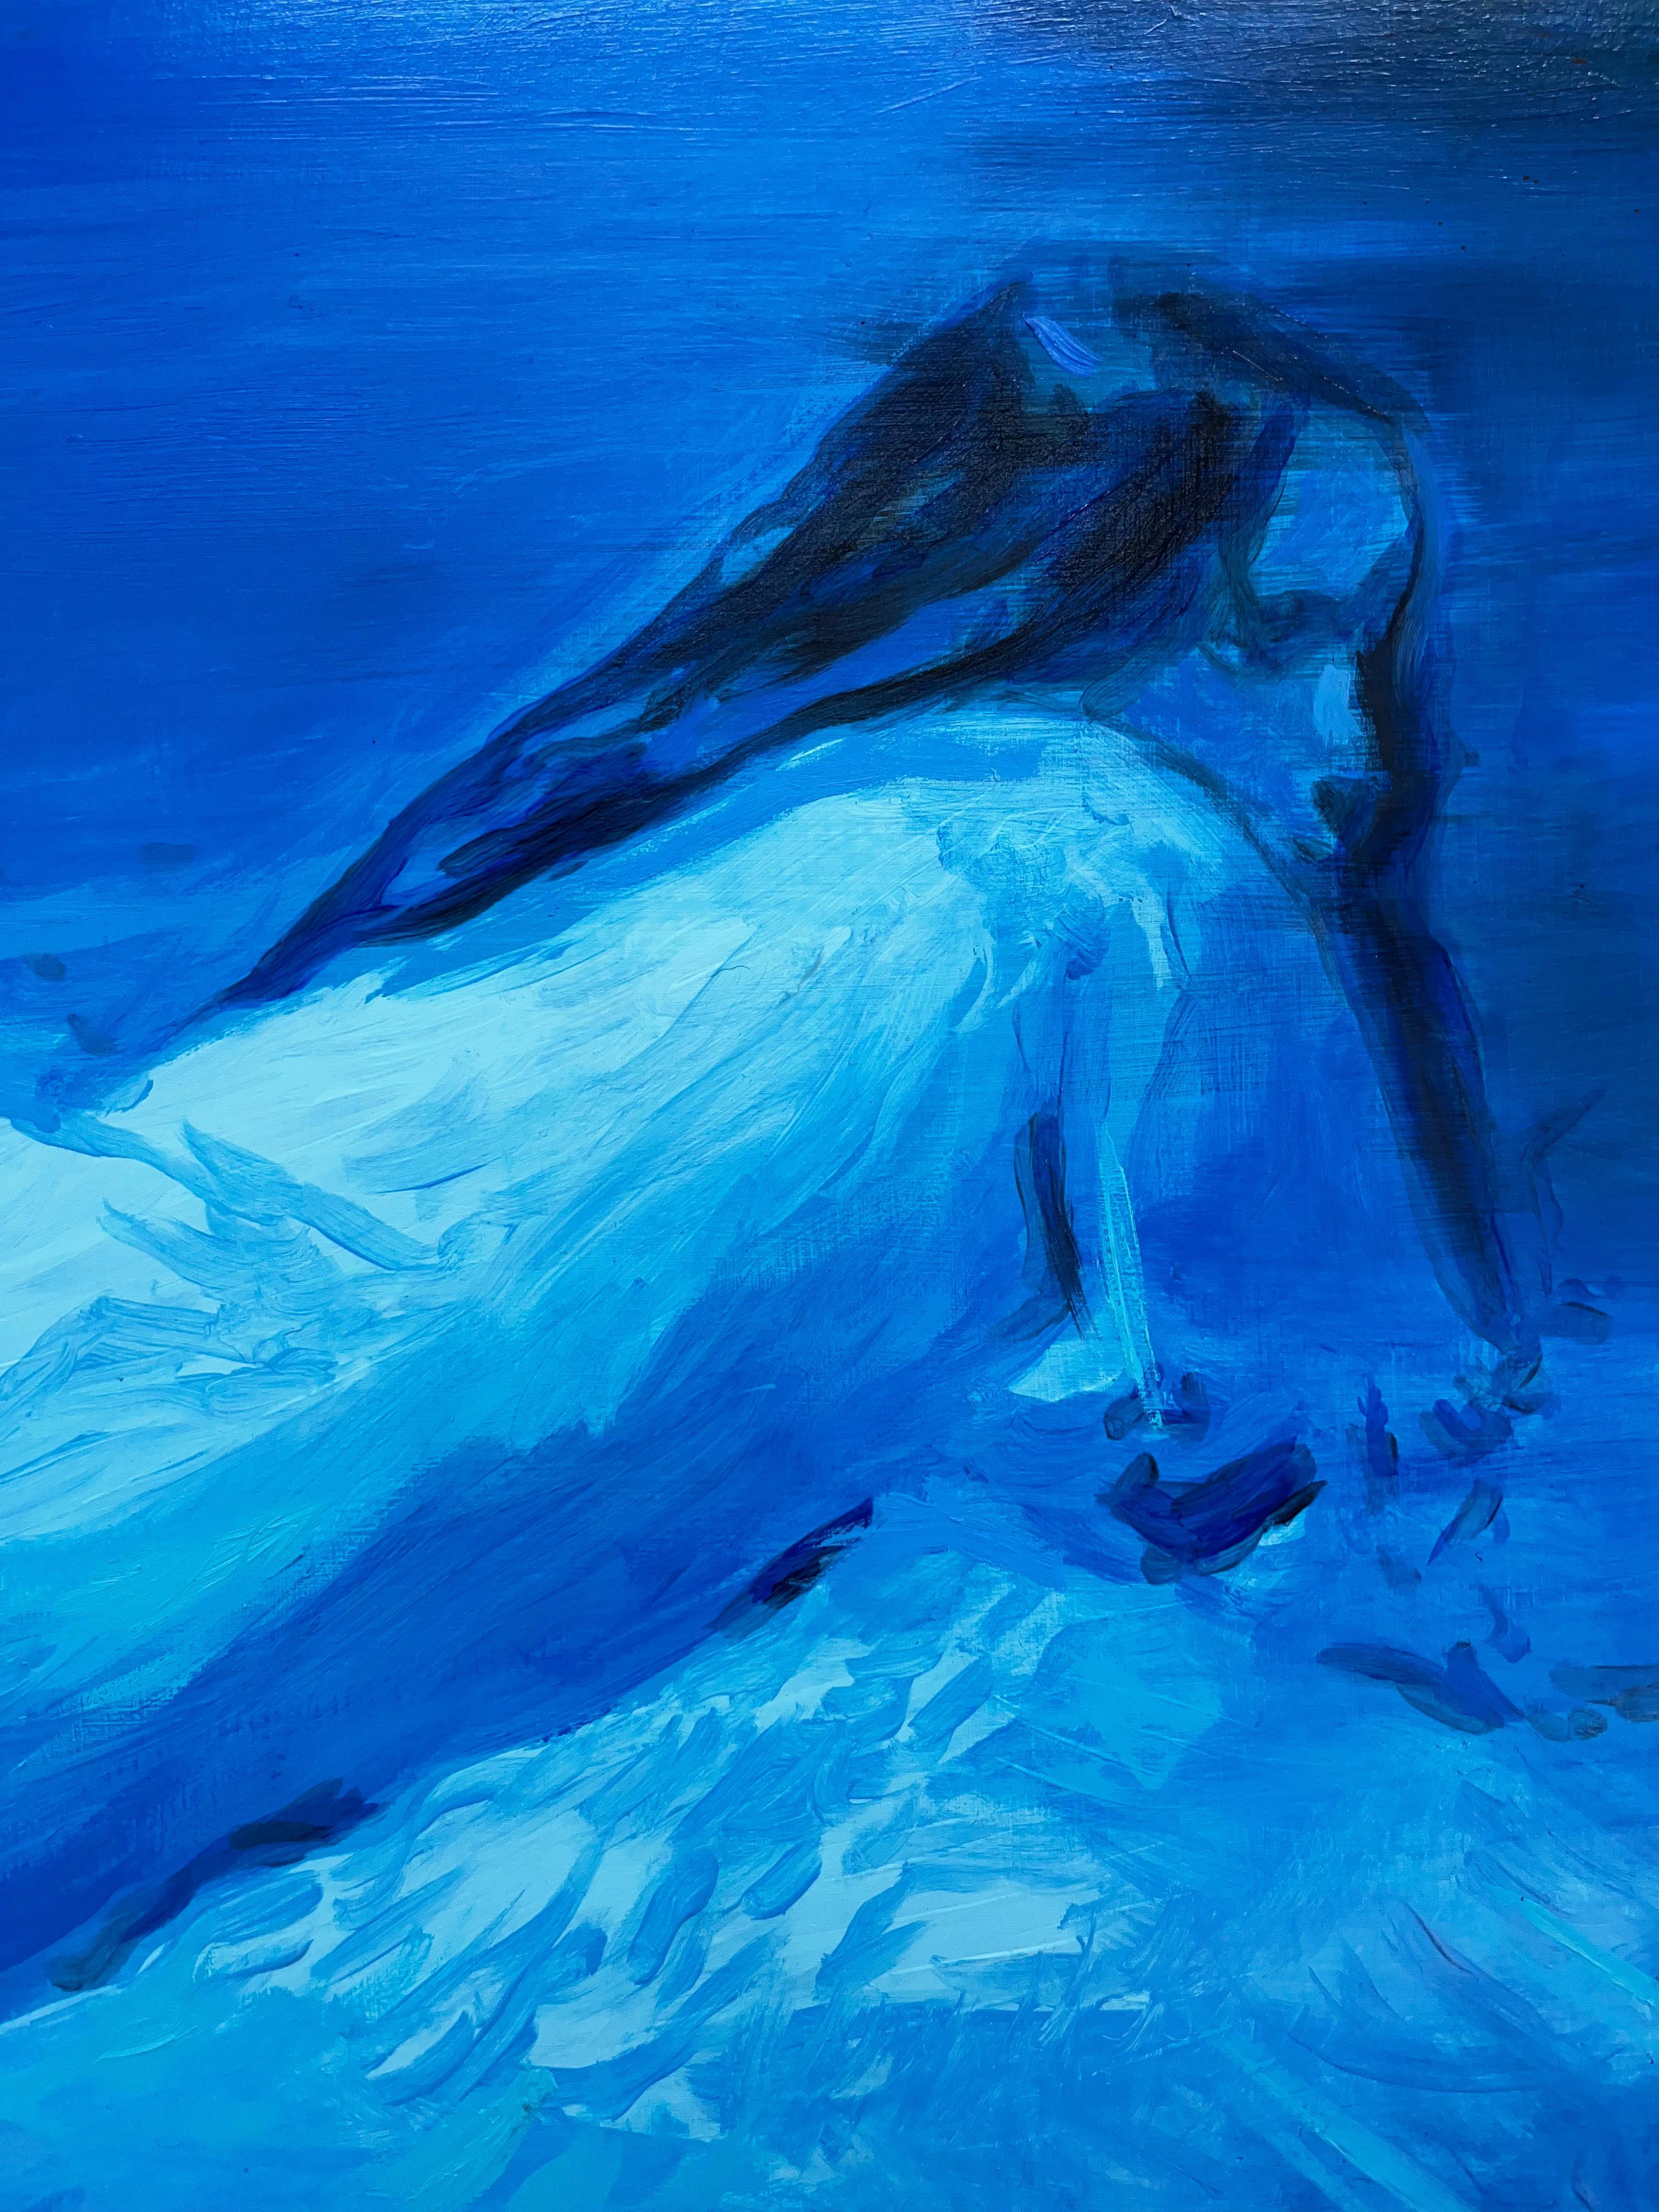 Untitled - Woman, nude portrait, figurative oil painting, blue & black - Contemporary Painting by Nicolás Guzmán